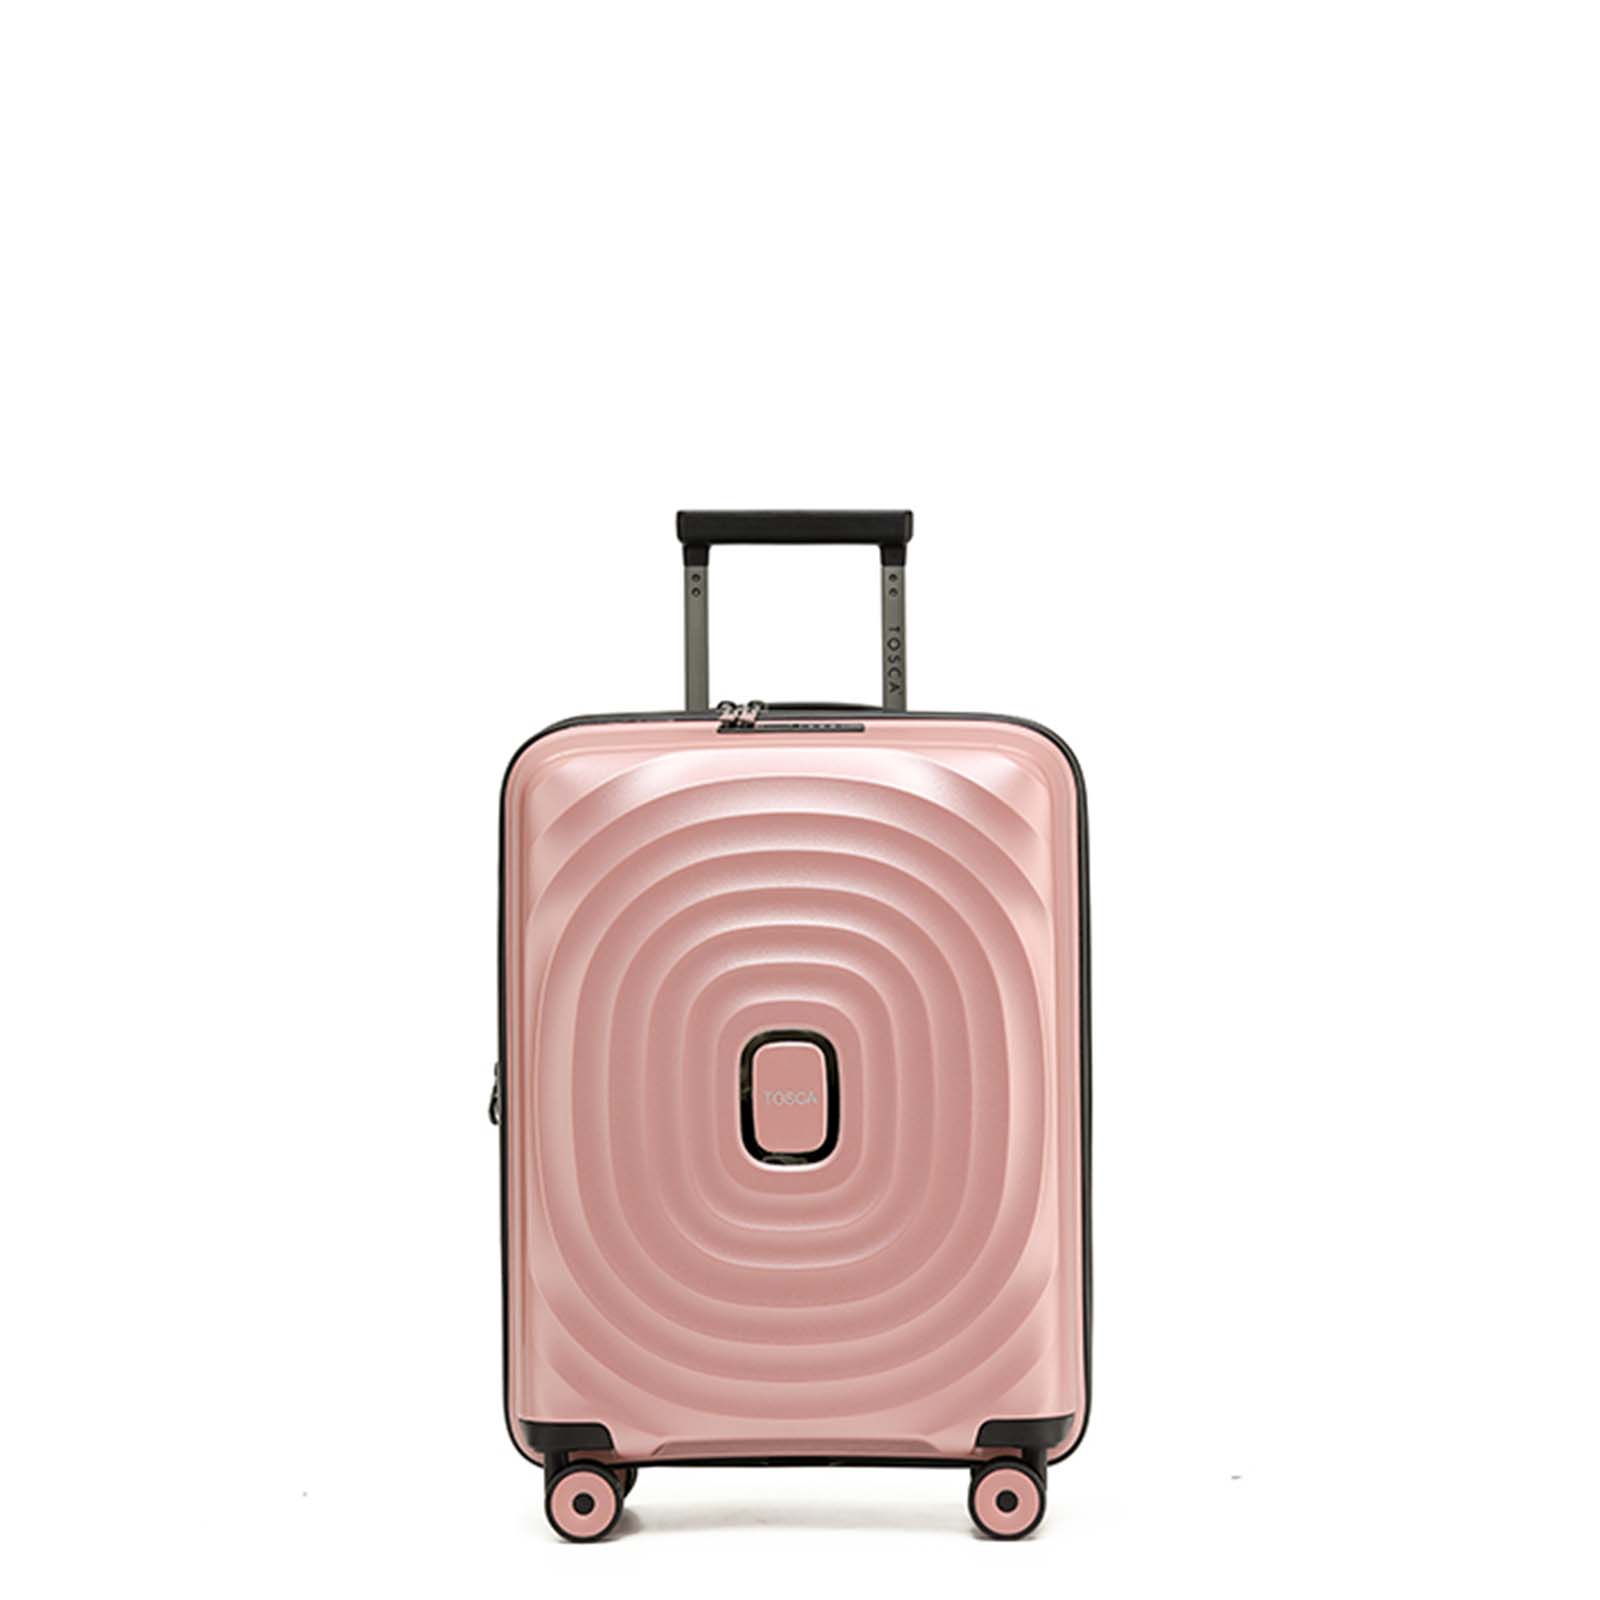 tosca-eclipse-4-wheel-55cm-carry-on-suitcase-rose-gold-front